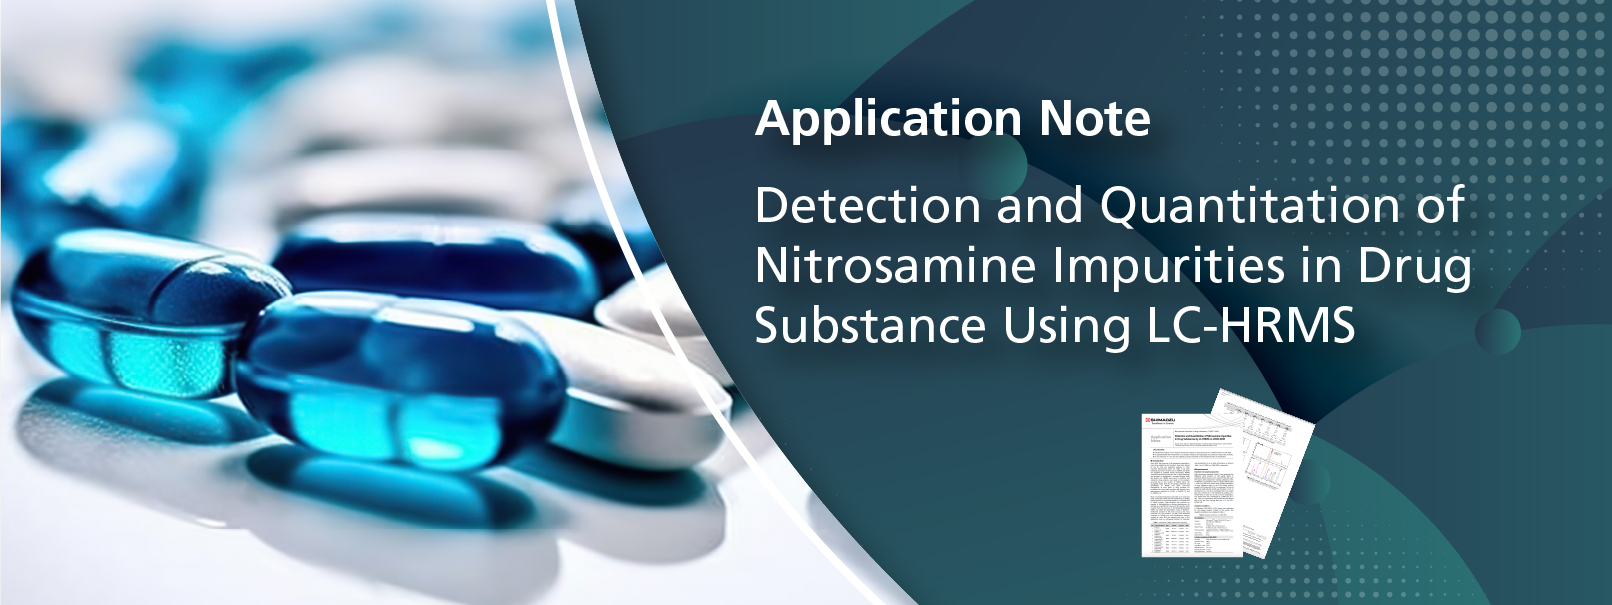 Detection and Quantitation of Nitrosamine Impurities in Drug Substance Using LC-HRMS